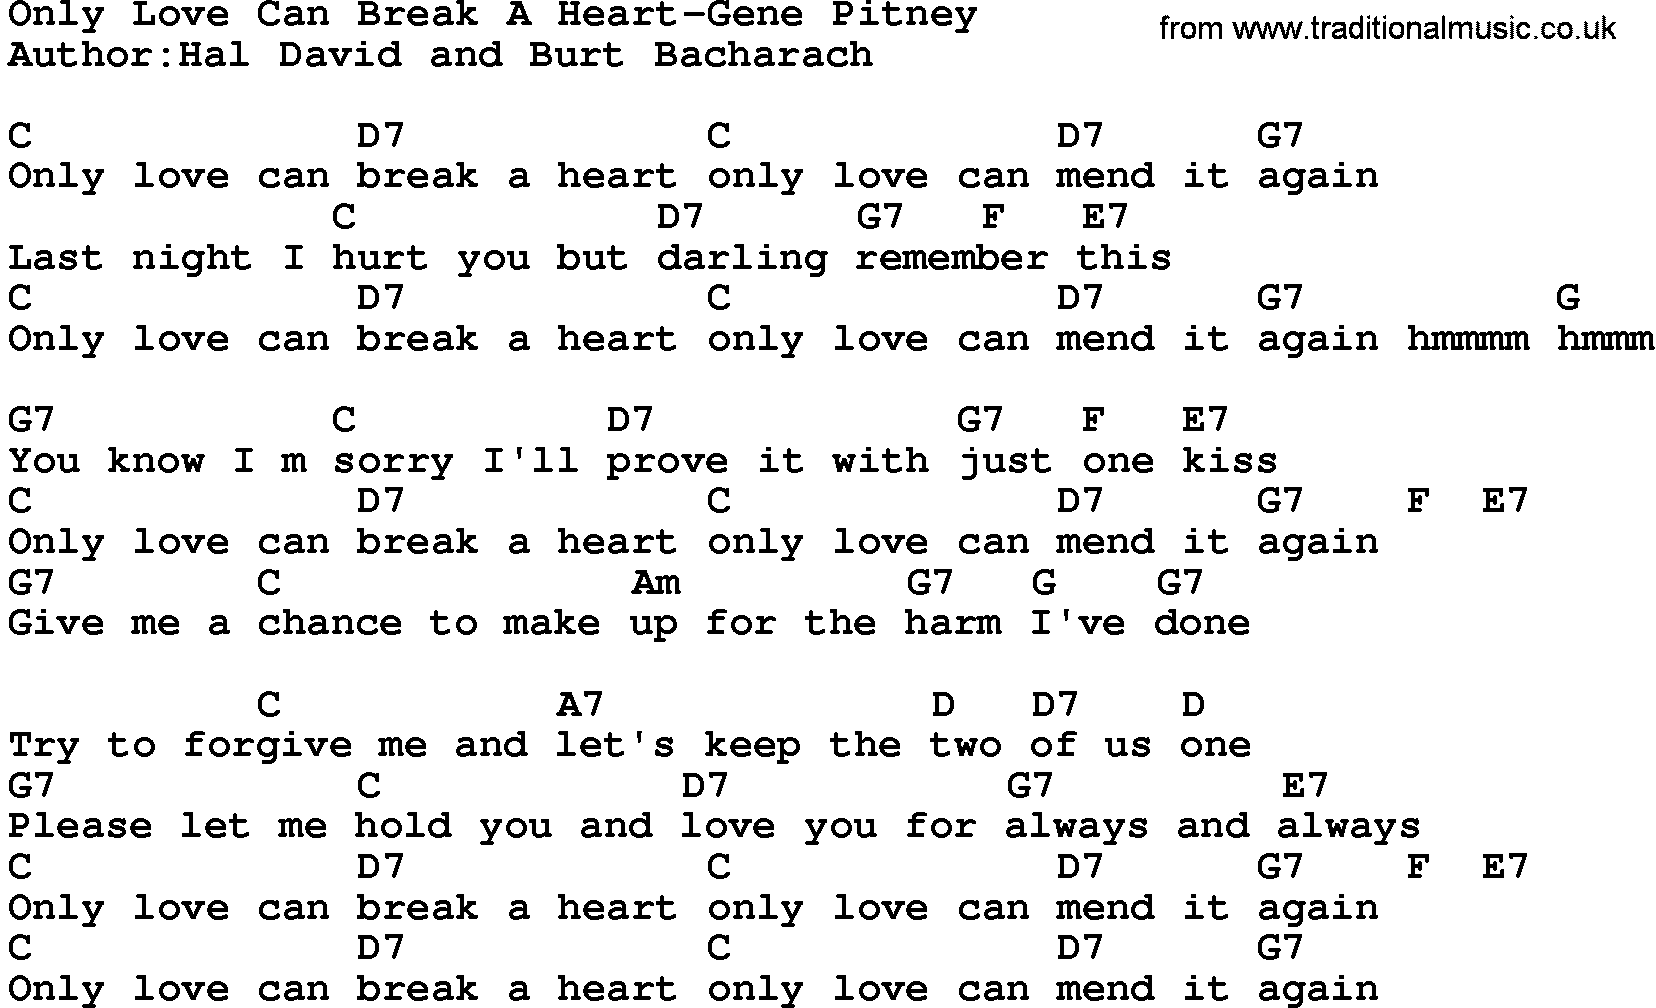 Country music song: Only Love Can Break A Heart-Gene Pitney lyrics and chords